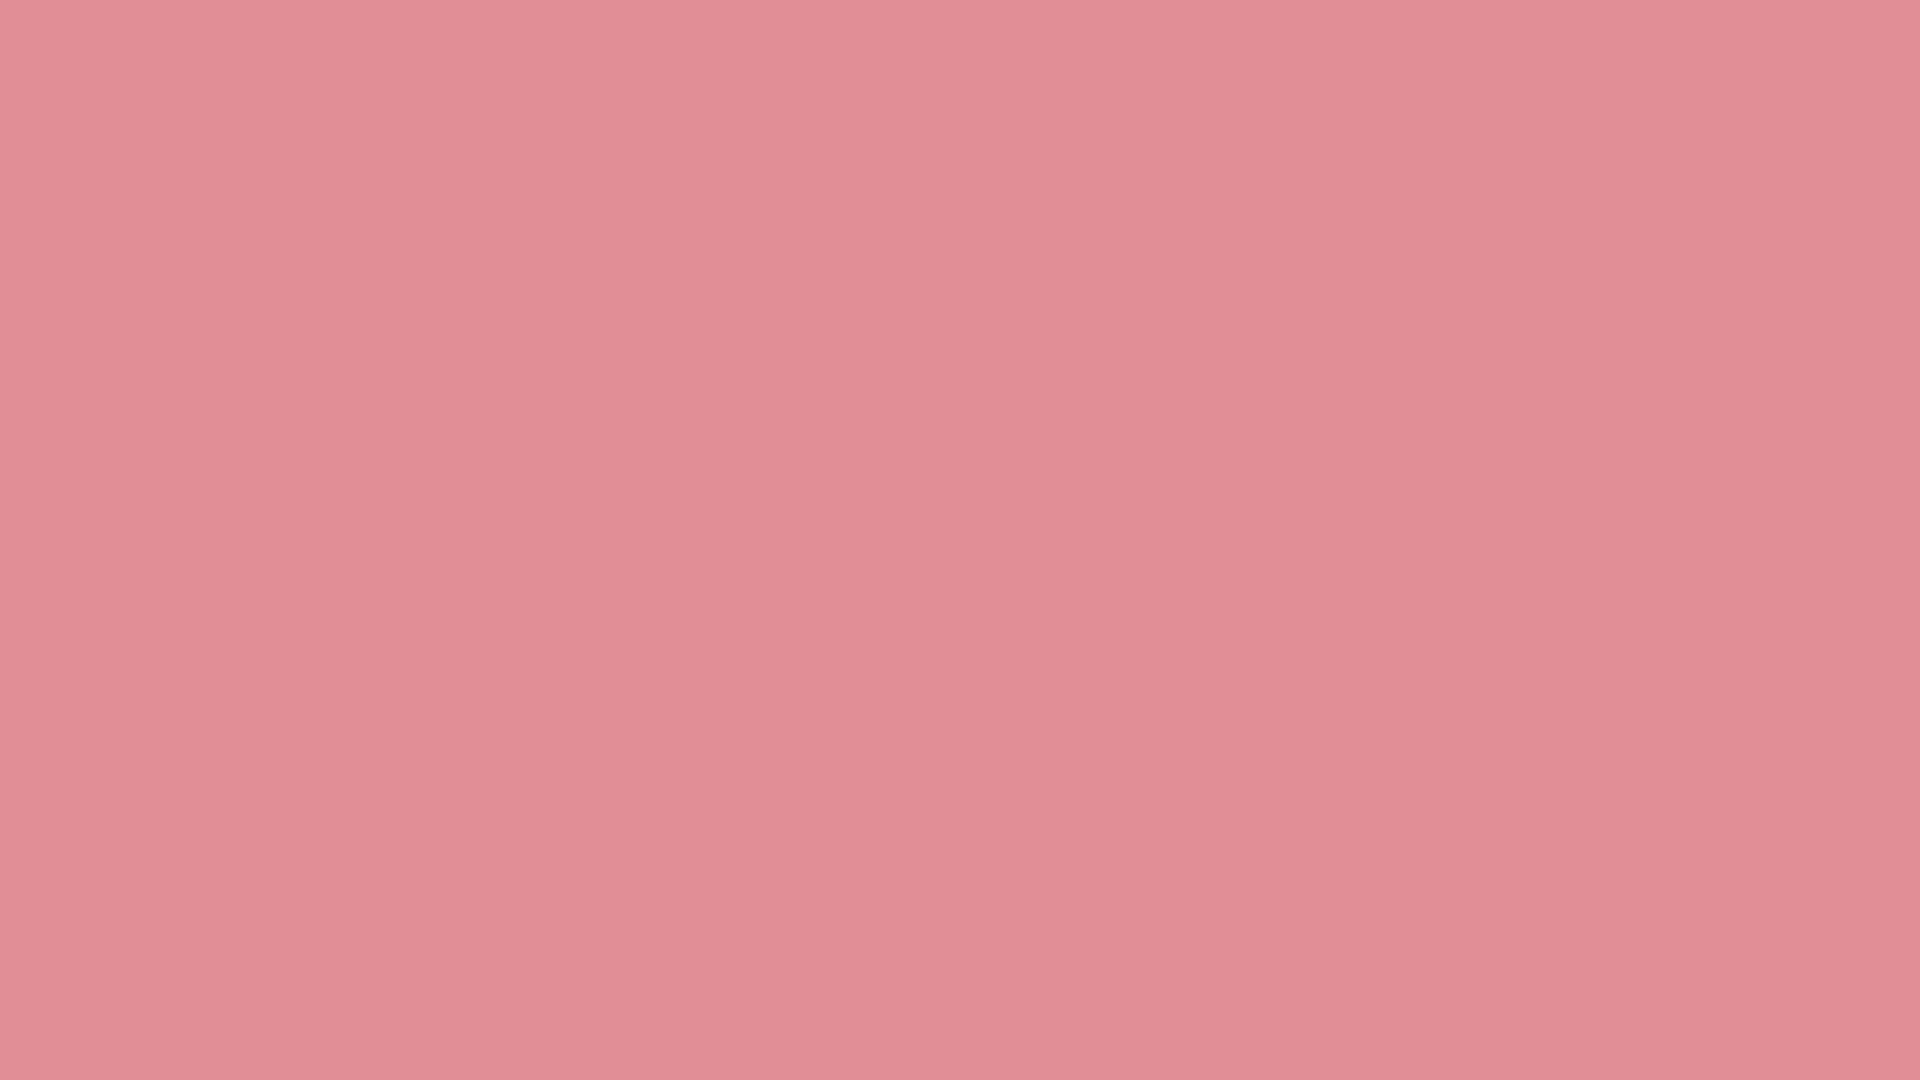 1920x1080 Ruddy Pink Solid Color Background